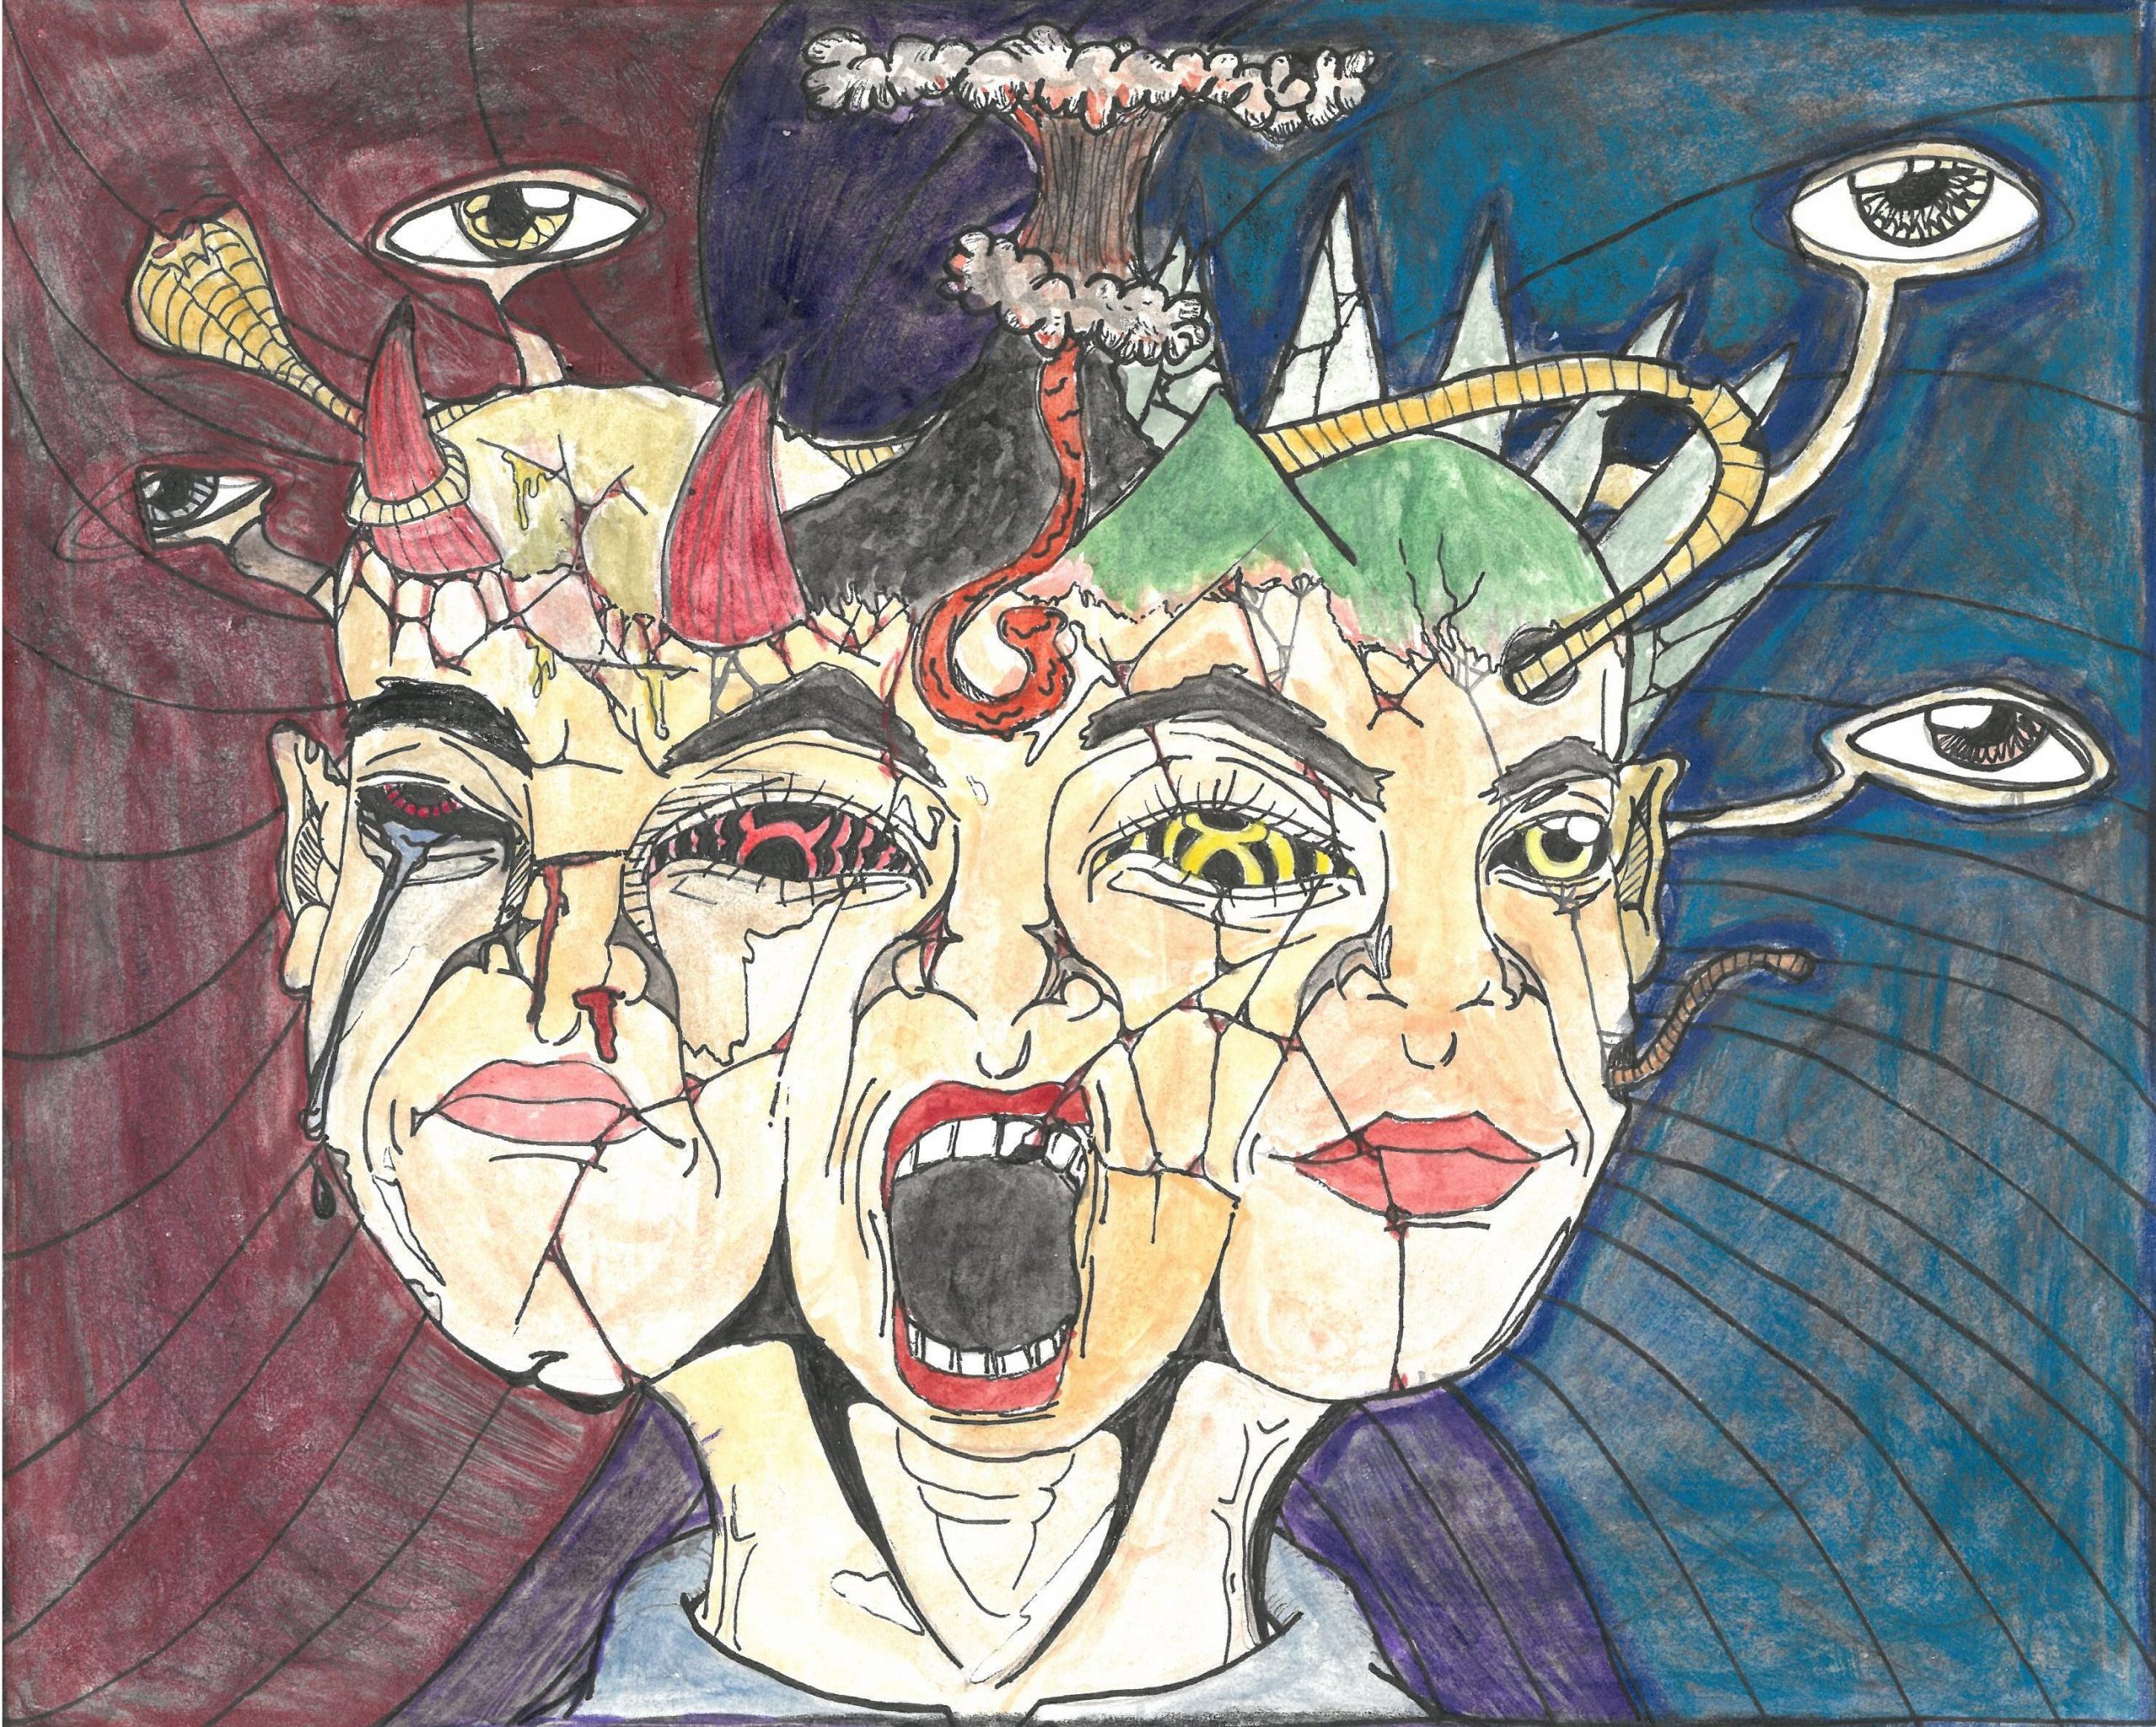 Three faces expressing different emotions